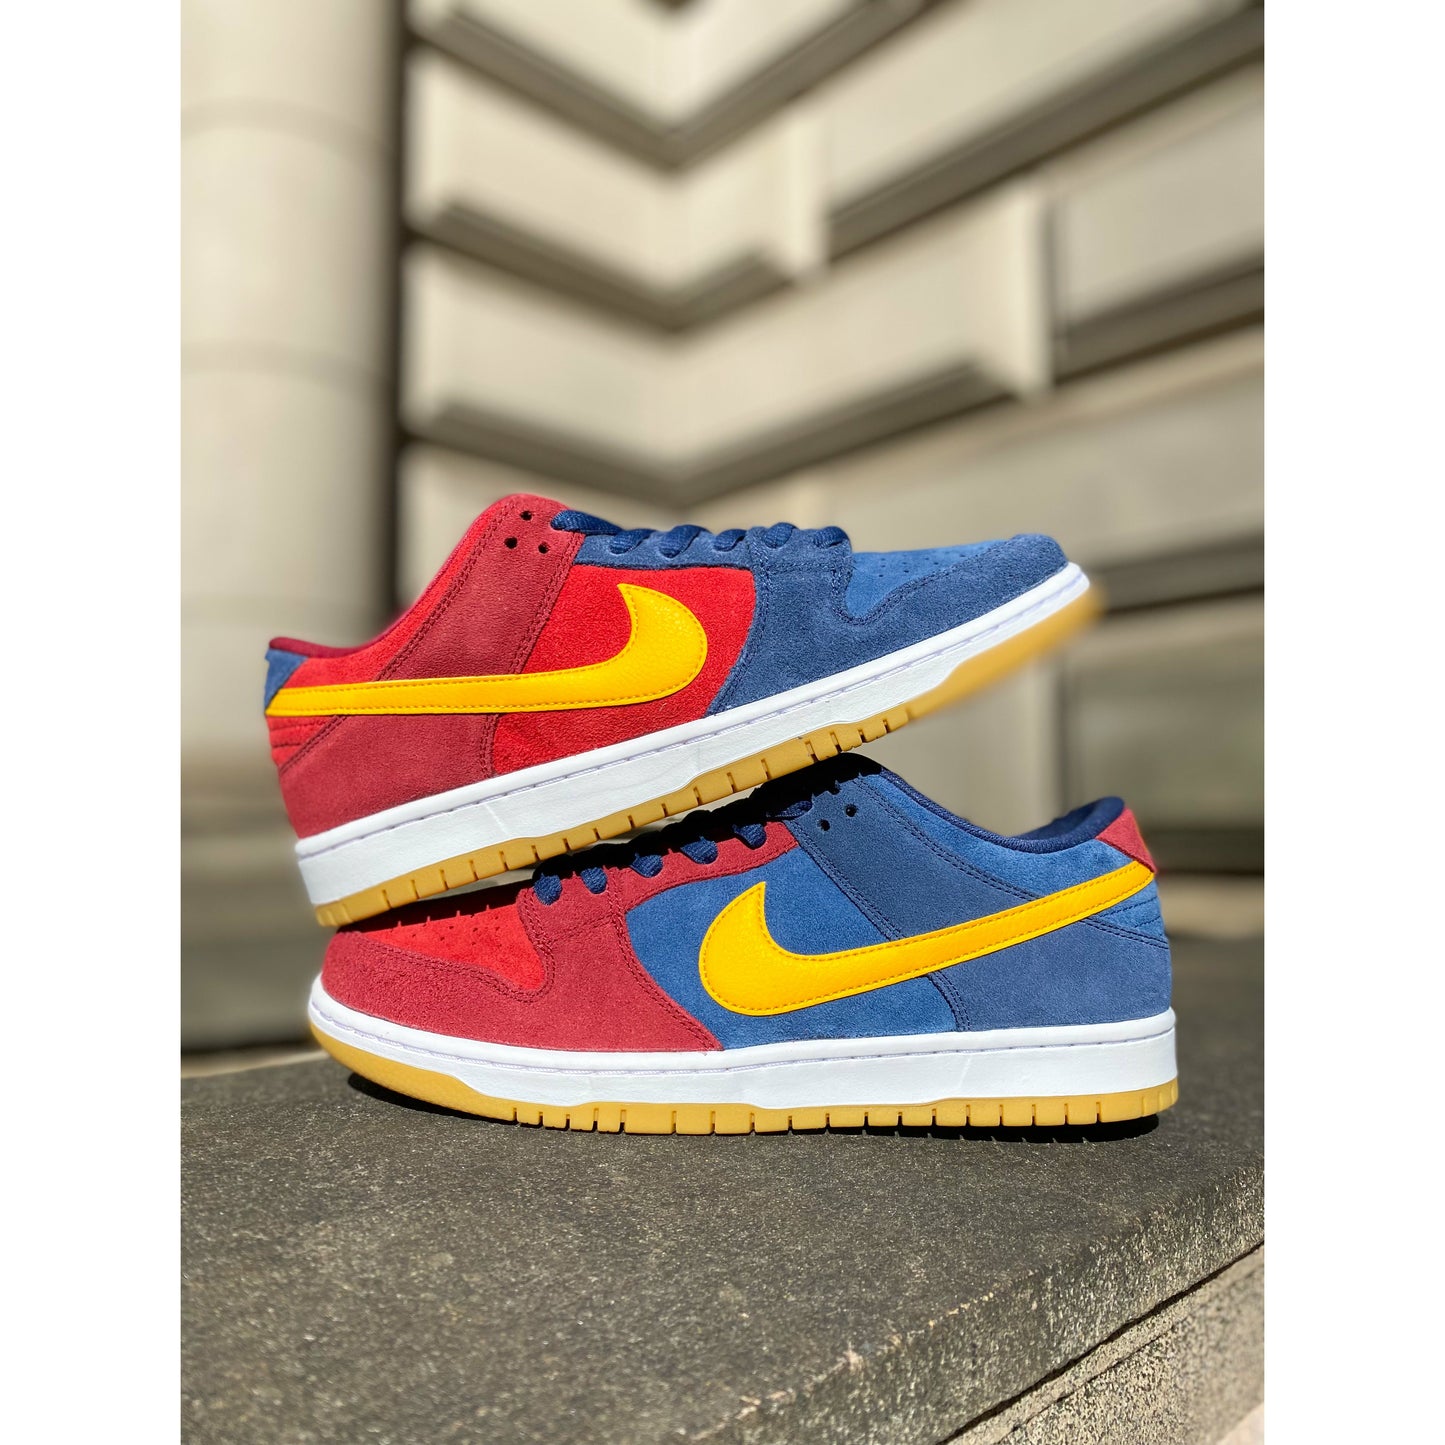 Nike SB Dunk Low Barcelona by Nike from £180.00